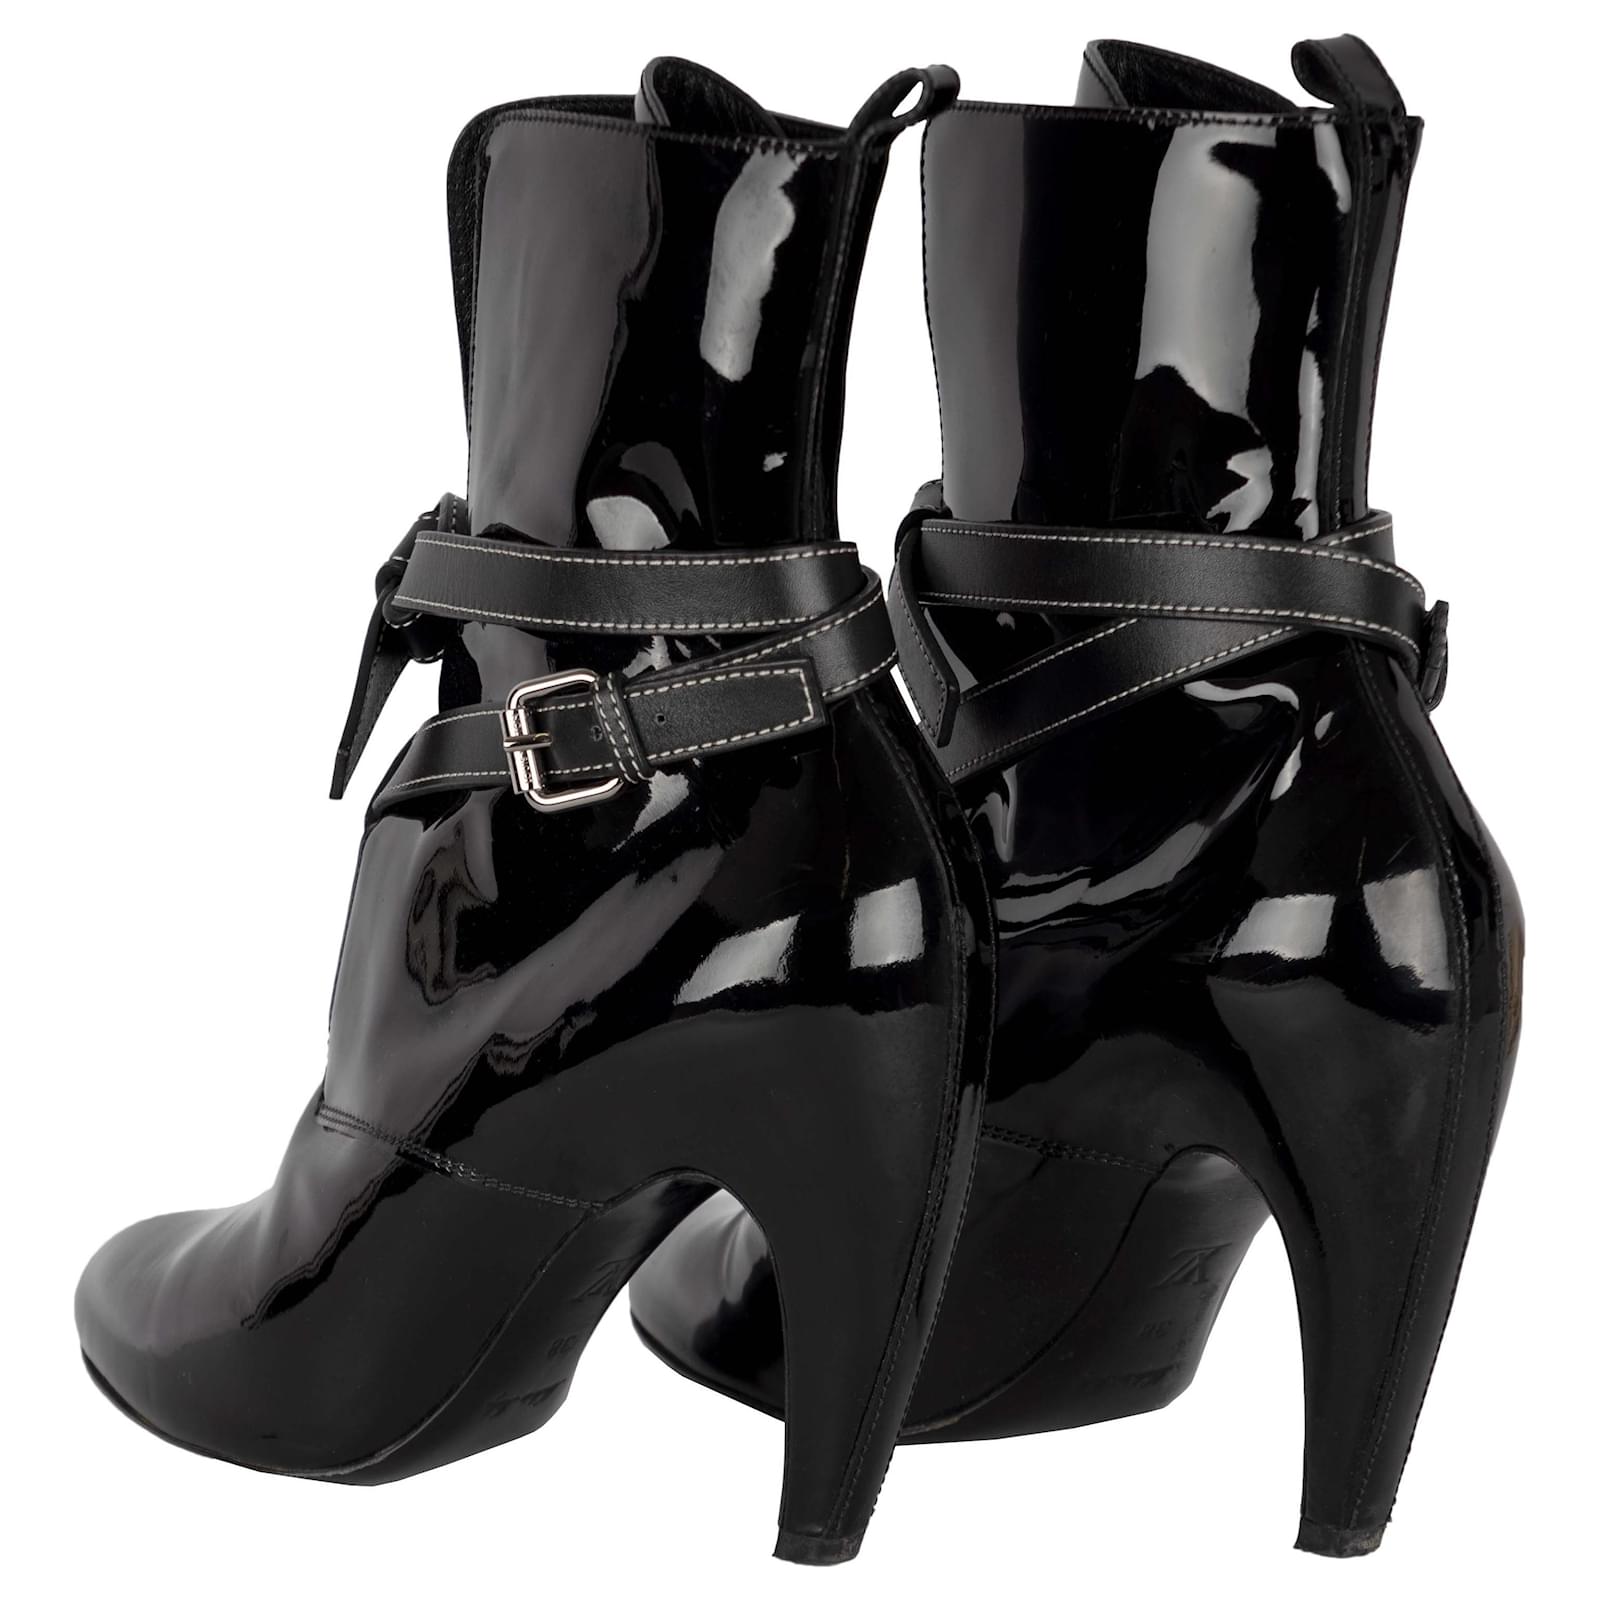 Louis Vuitton High Heel Ankle Boots in Black Patent Leather ref